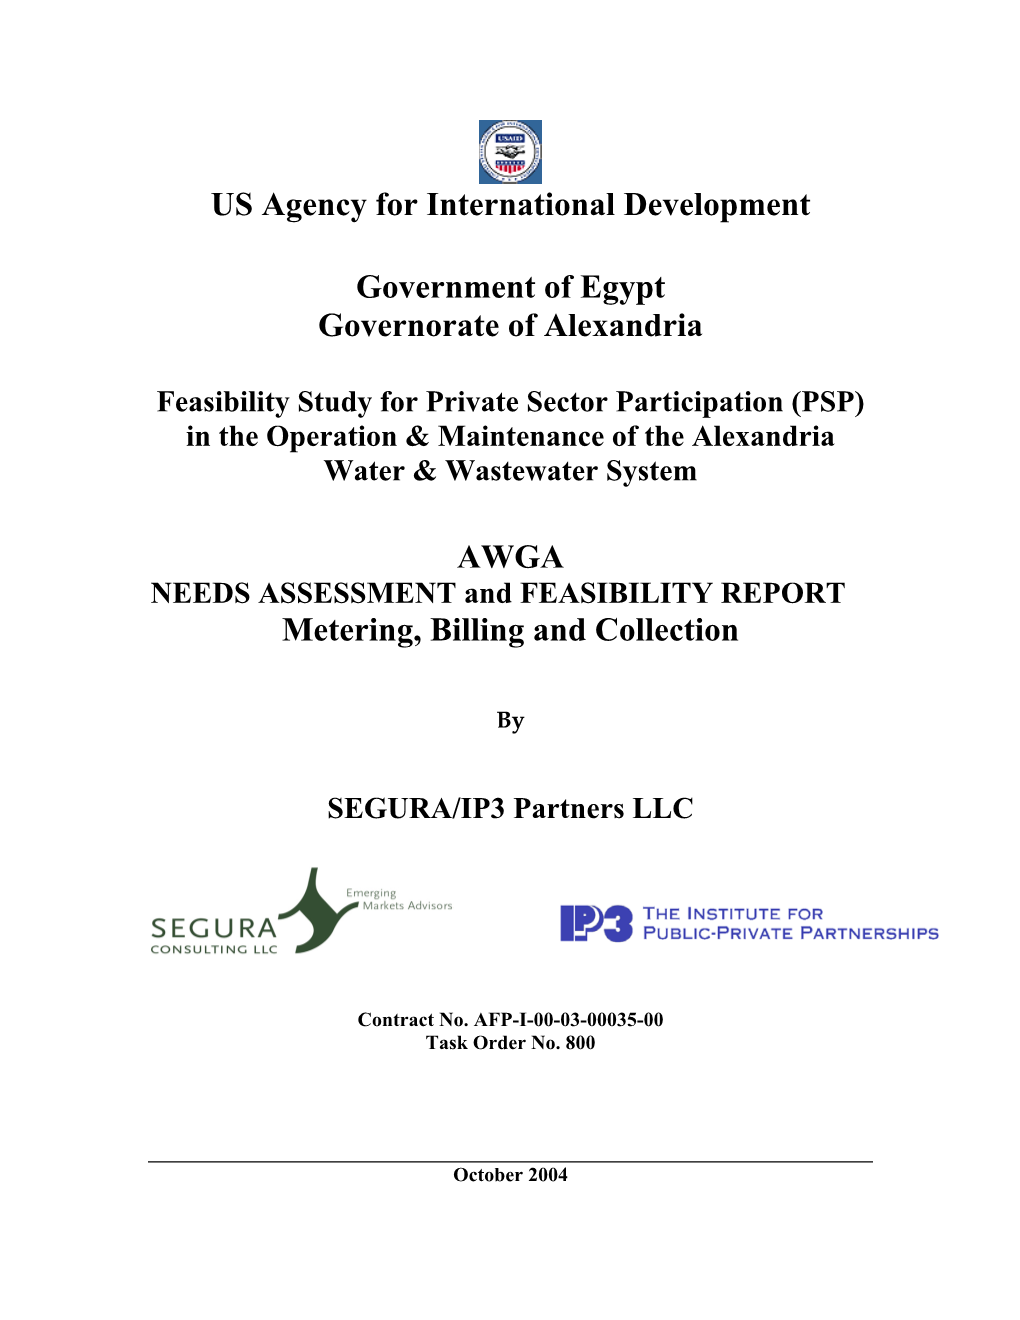 AWGA NEEDS ASSESSMENT and FEASIBILITY REPORT Metering, Billing and Collection